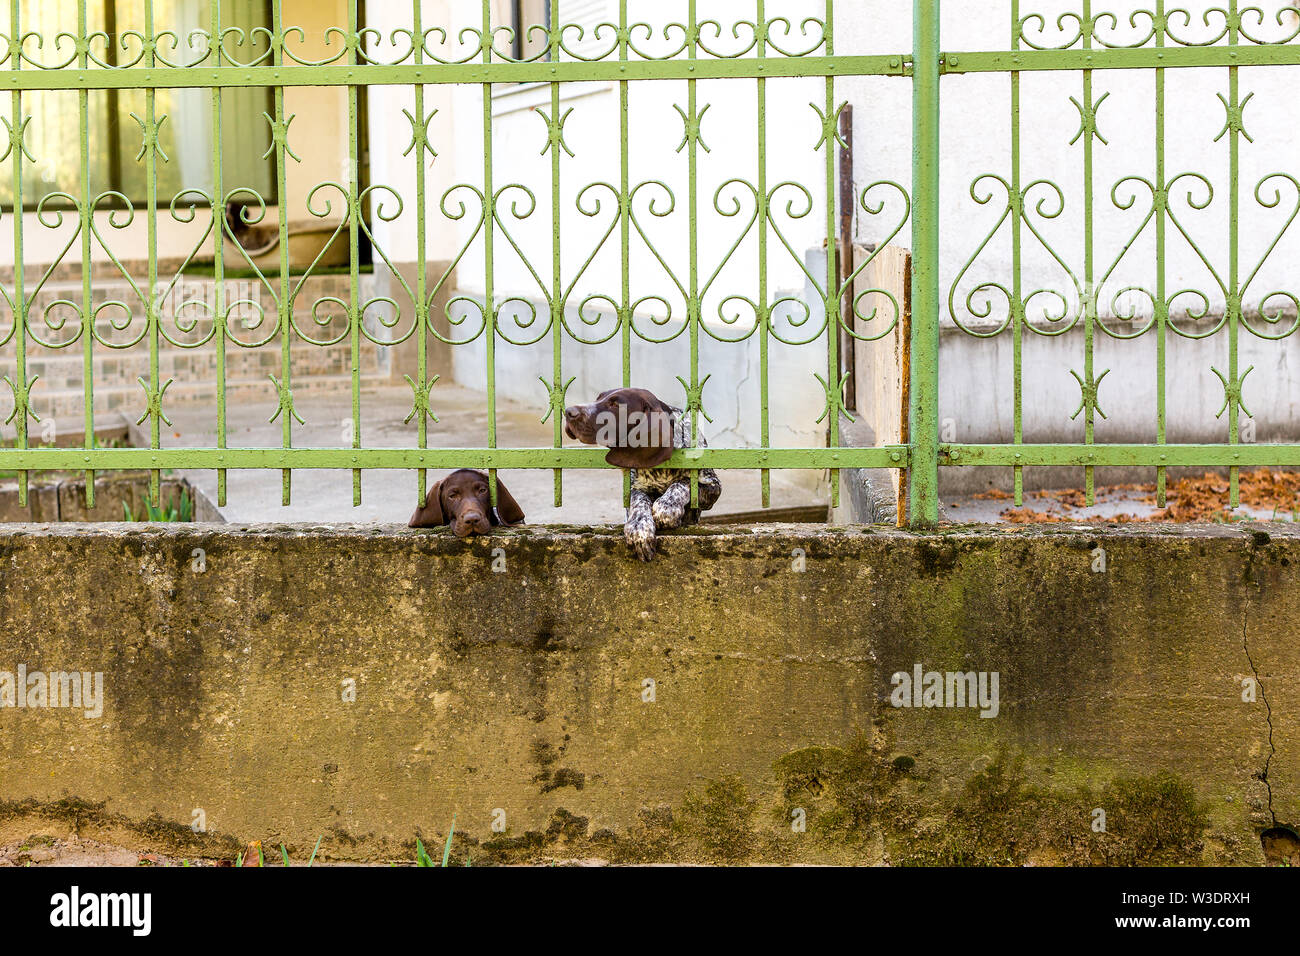 Two German Shorthaired Pointer behind metal fence. One dog looks sad with tears in eyes. Another stuck head through bars, motion blur. Space for text Stock Photo